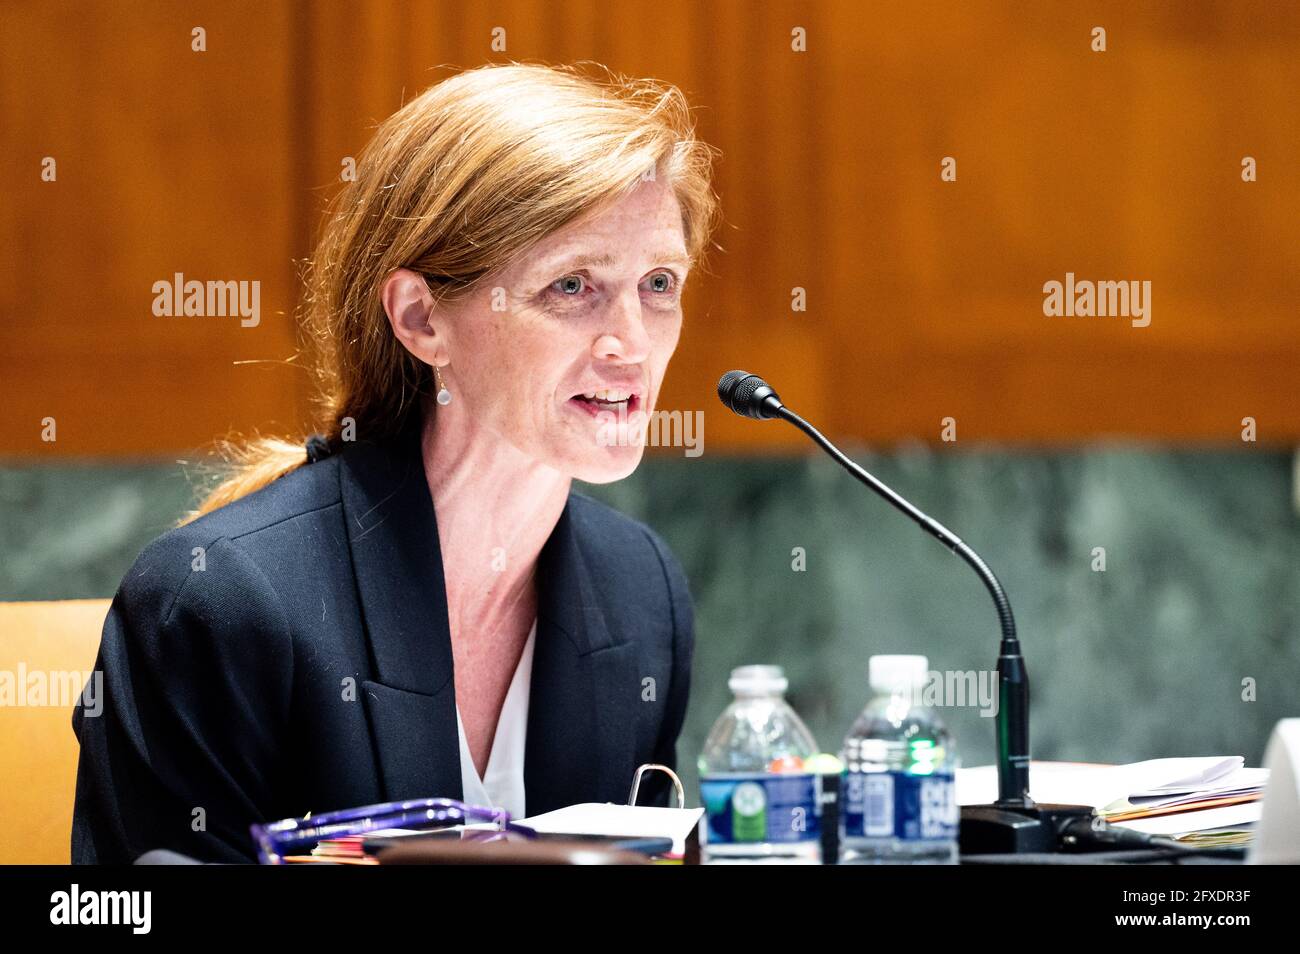 Washington, USA 26. Mai 2021. 26. Mai 2021 - Washington, DC, USA: Samantha Power, Administrator, United States Agency for International Development, spricht bei einer Anhörung des Senate Appropriations Committee Subcommittee on State, Foreign Operations, and Related Programs. (Foto: Michael Brochstein/Sipa USA) Quelle: SIPA USA/Alamy Live News Stockfoto